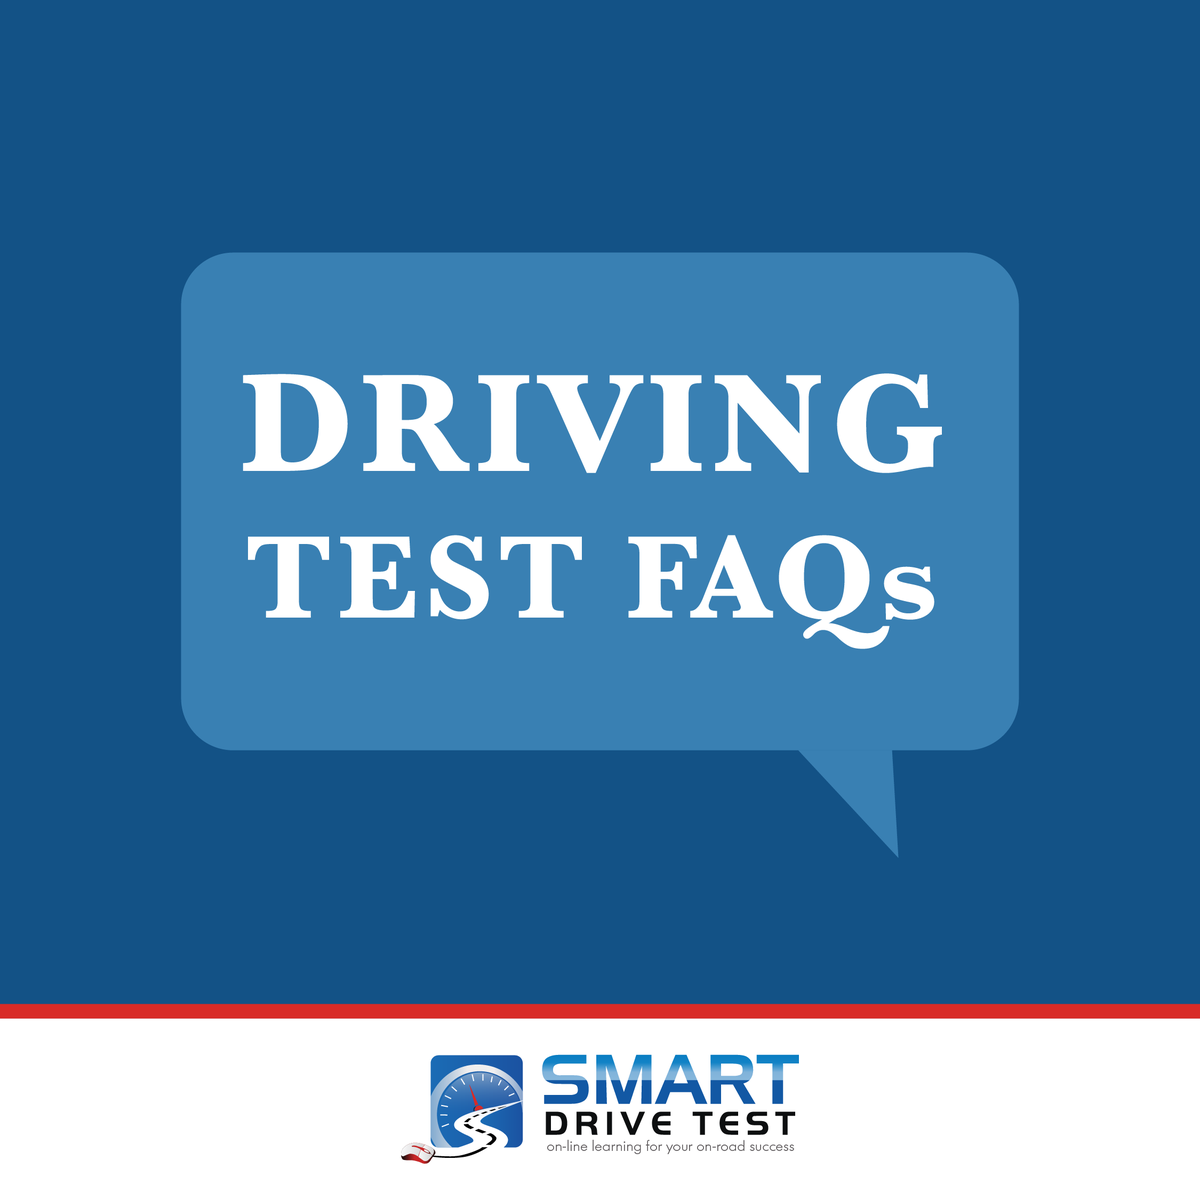 All your driving test questions answered! CLICK to see FAQs for the driving test in your state or province: smartdrivetest.com/faqs/drivers-t… Your valuable feedback is always welcome! Thanks, Cheers Rick #drivingtest #drivingschool #drivingtesttips #drivingtestpassed #drivingtestsuccess